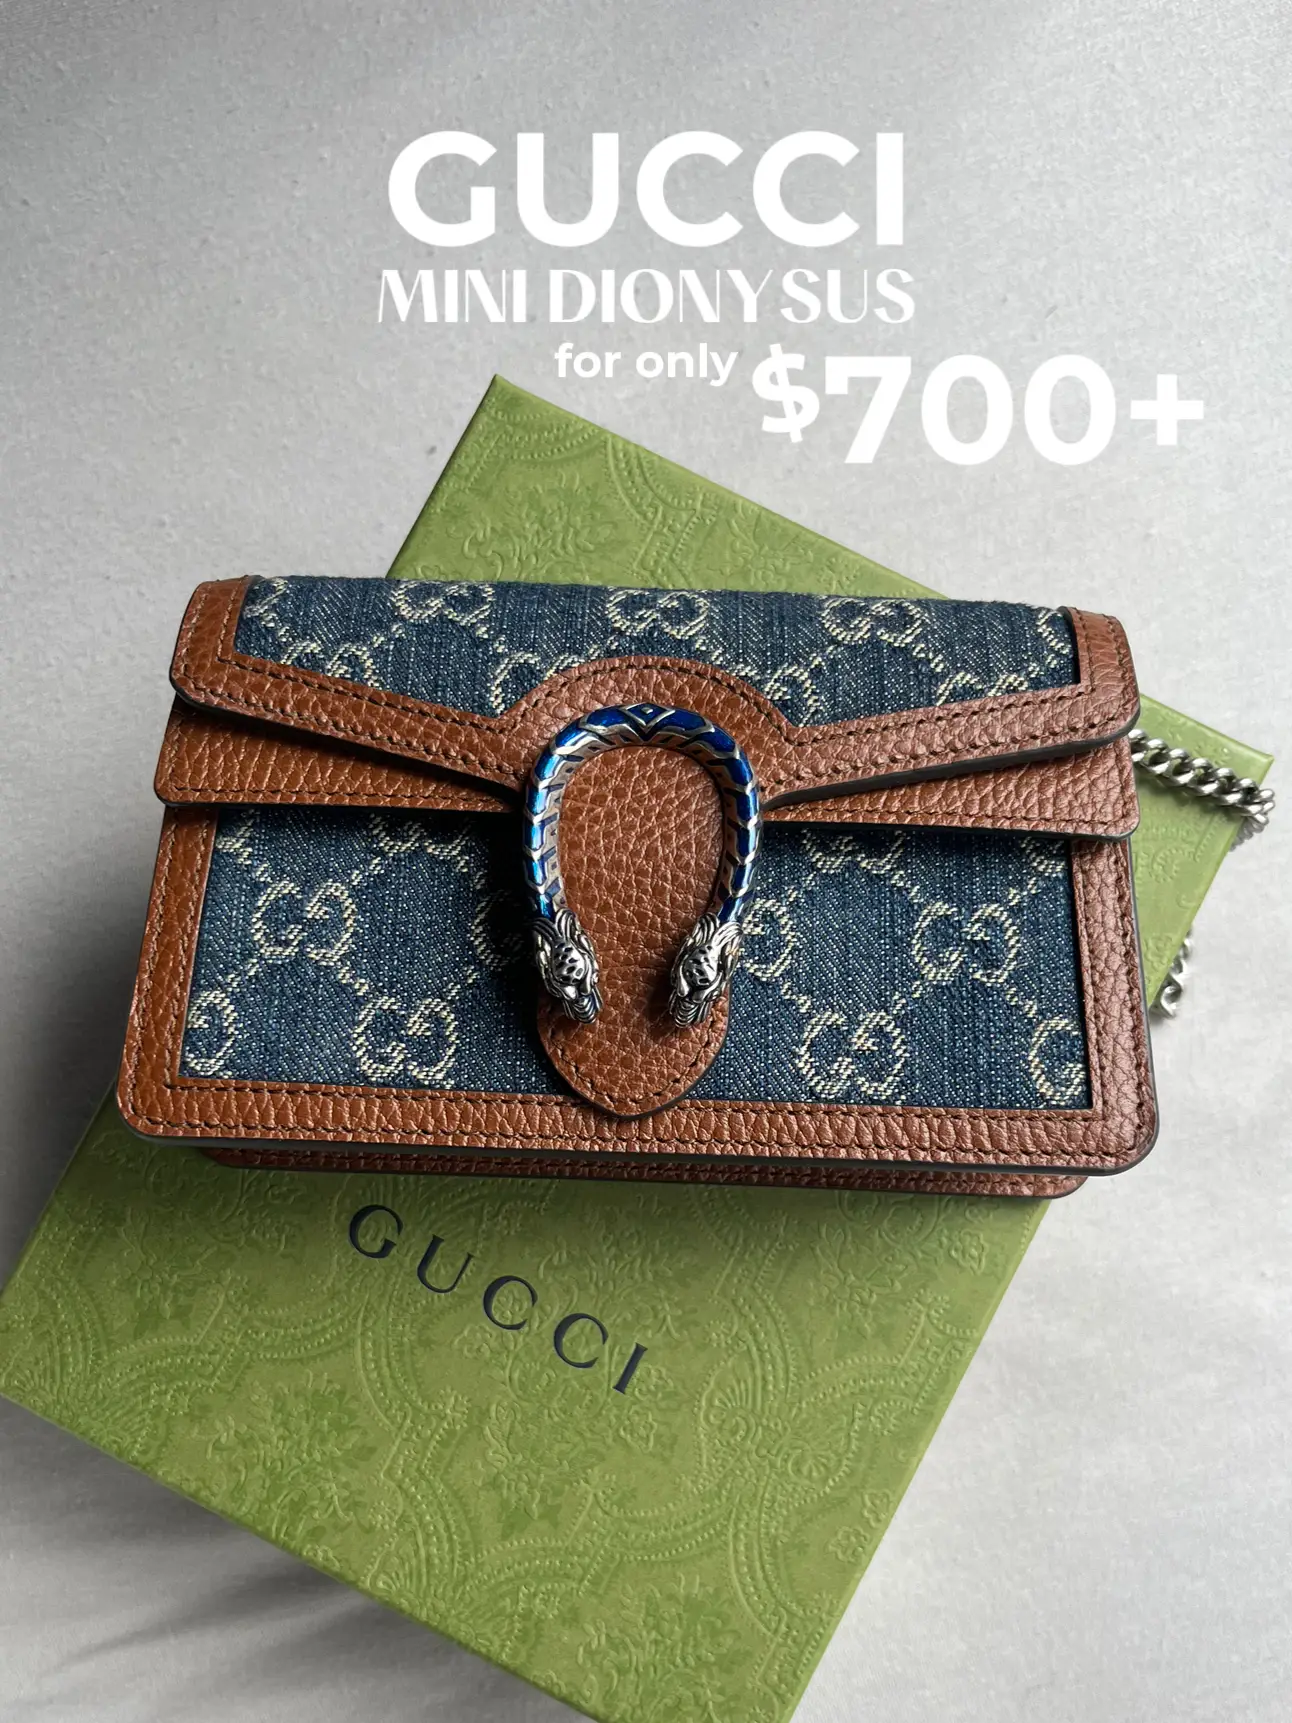 Gucci Bags Outlet Online (guccioutletbags) - Profile